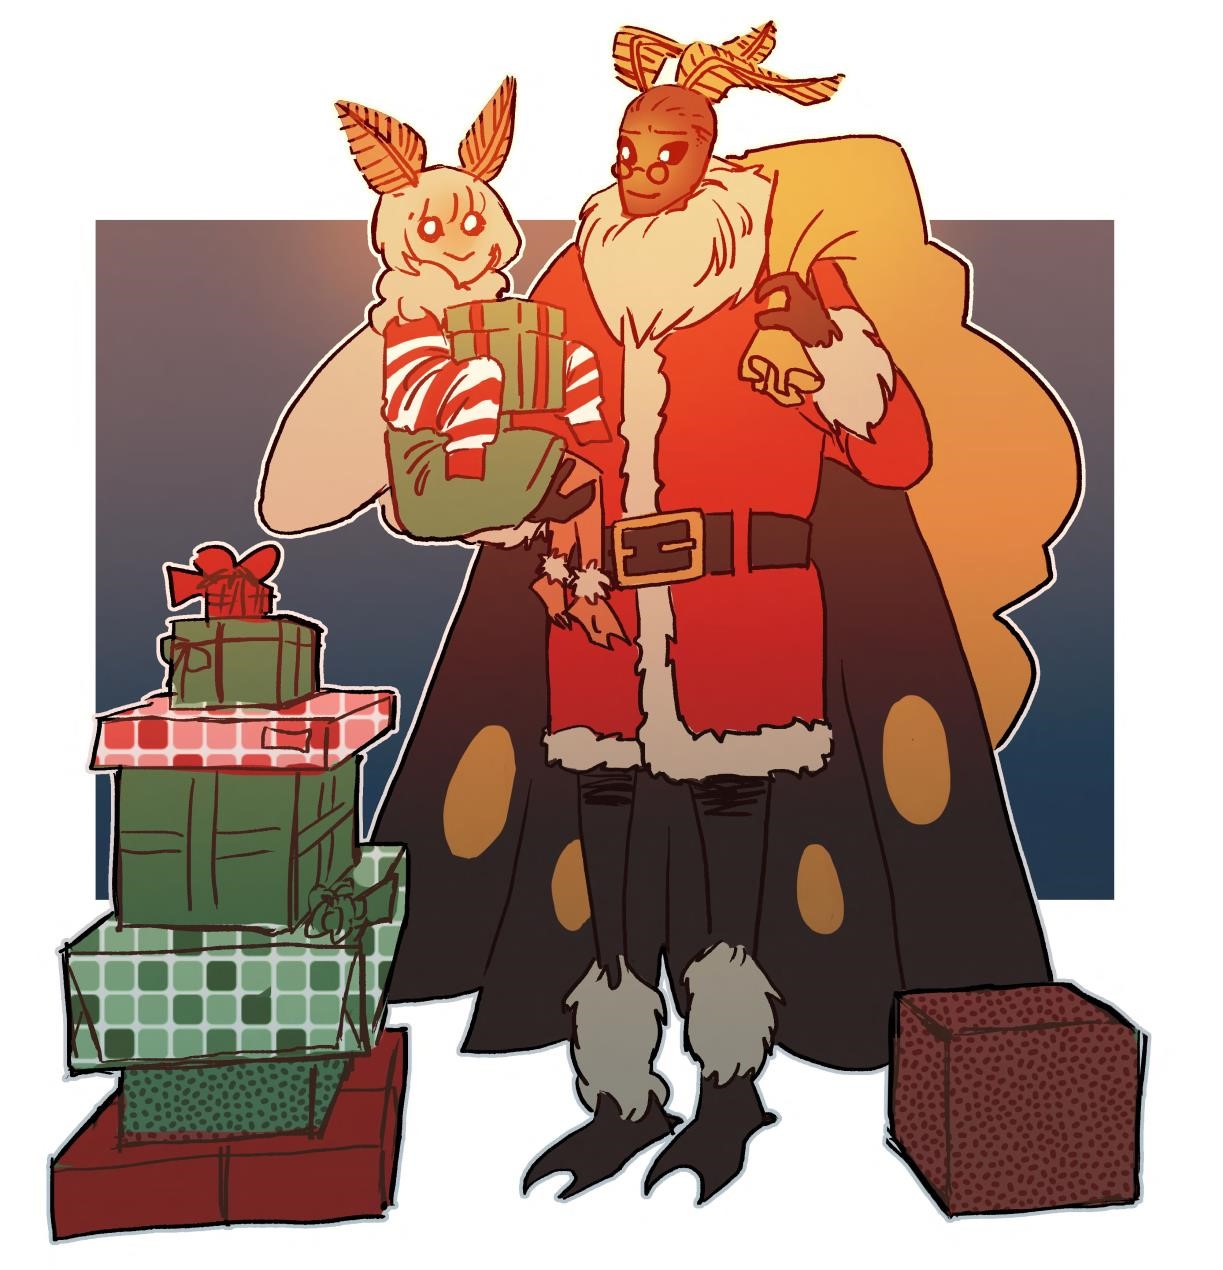 Mothmas illustration by Wirral Met student